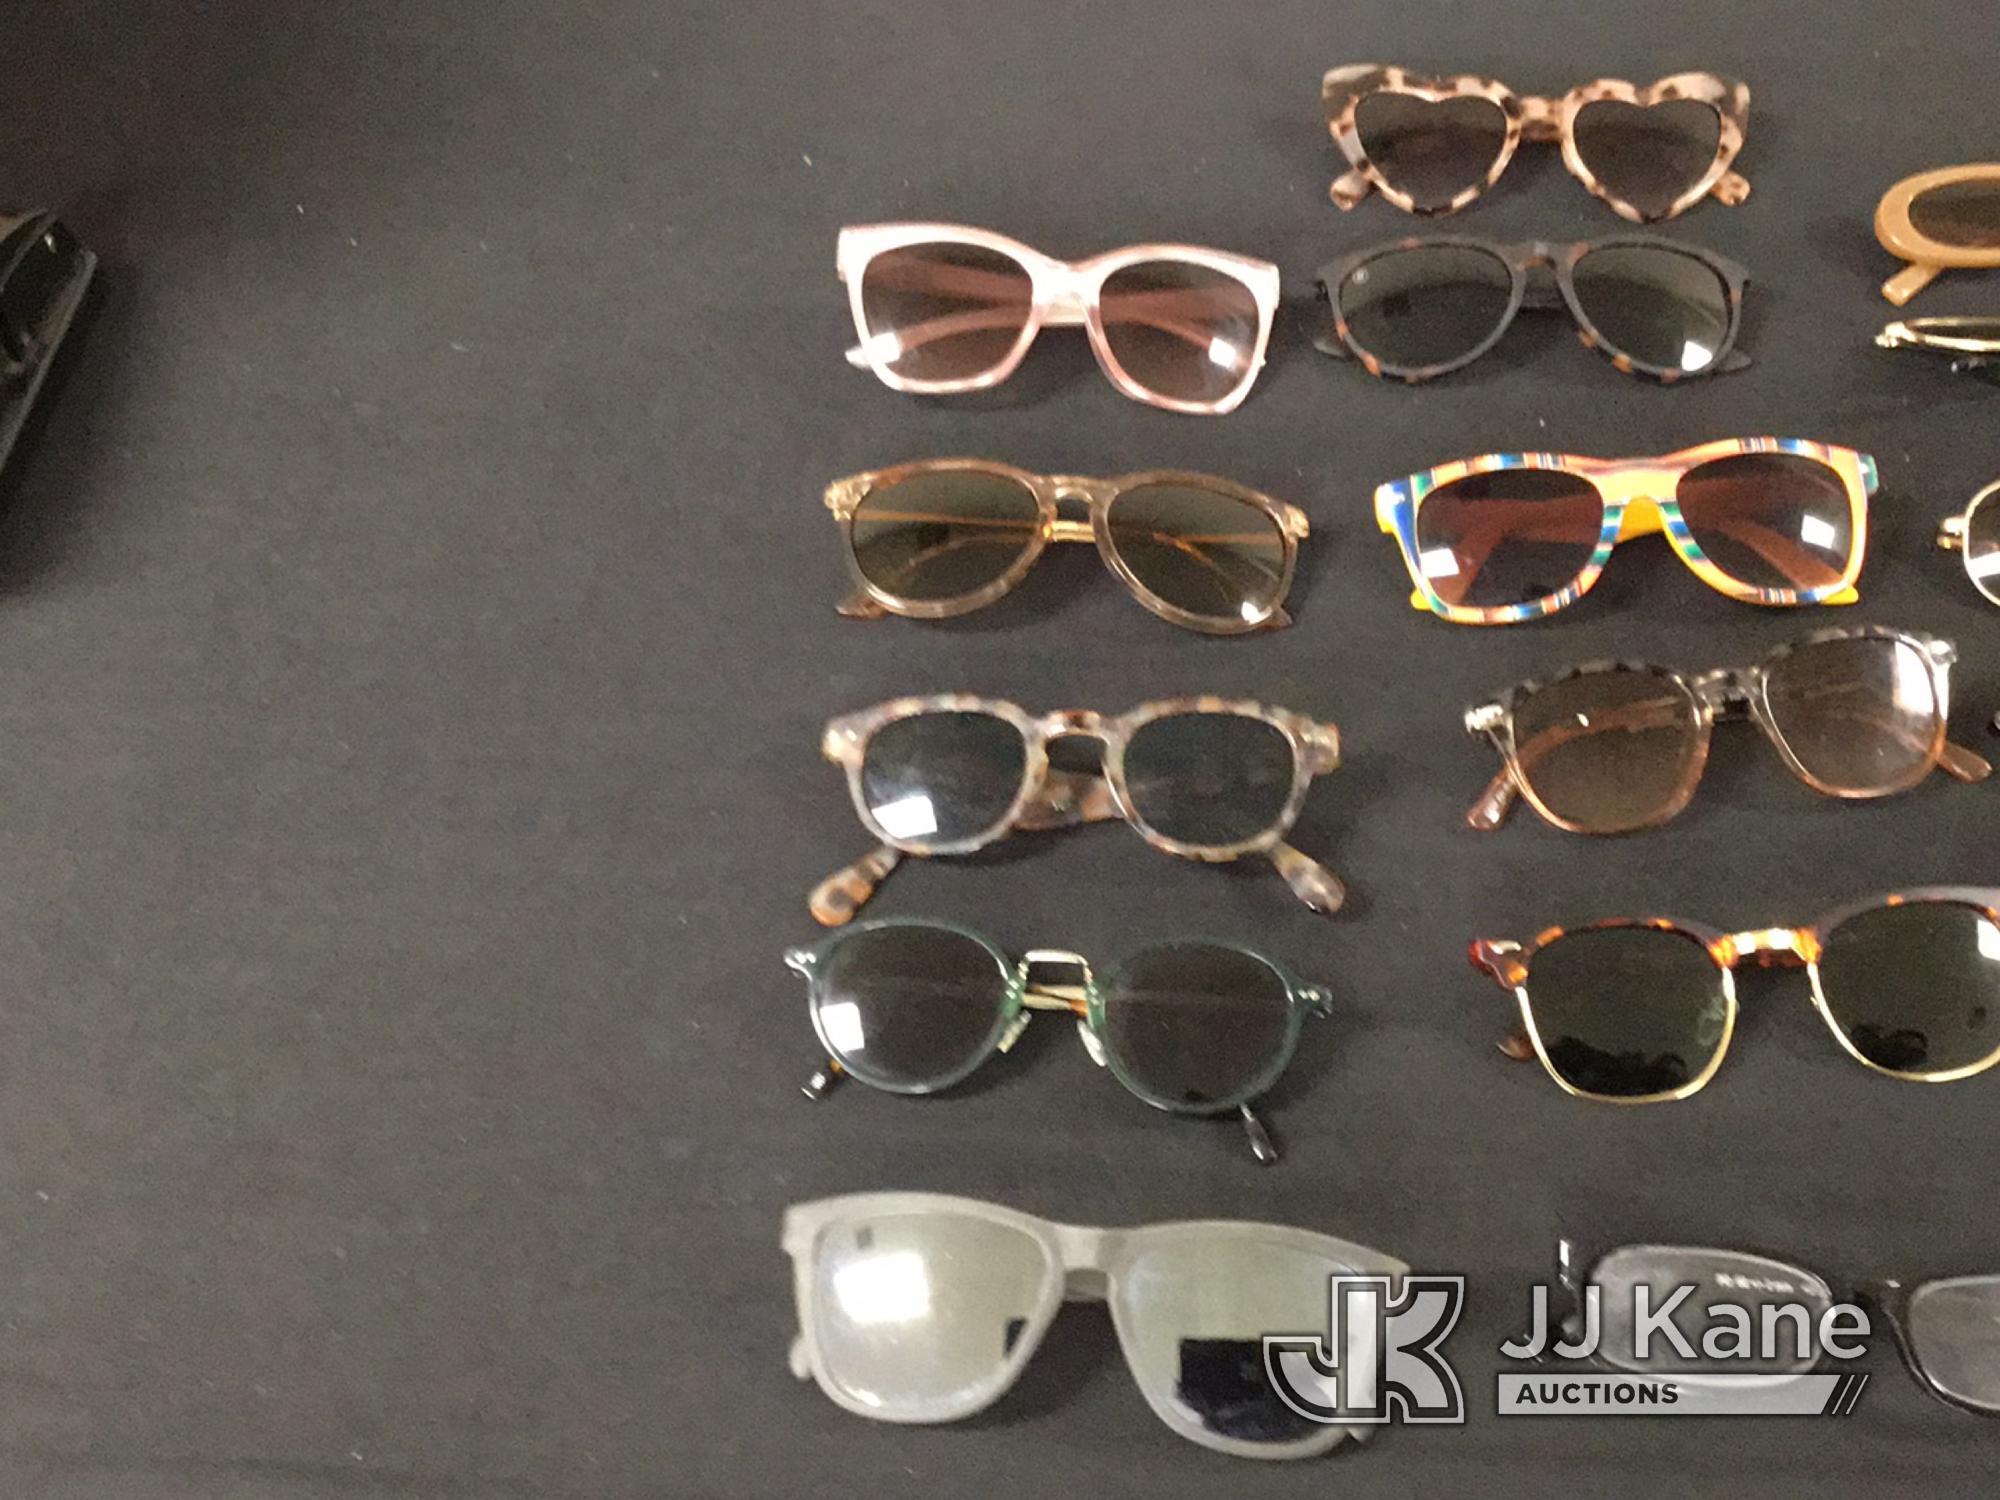 (Jurupa Valley, CA) Sunglasses | authenticity unknown (Used ) NOTE: This unit is being sold AS IS/WH